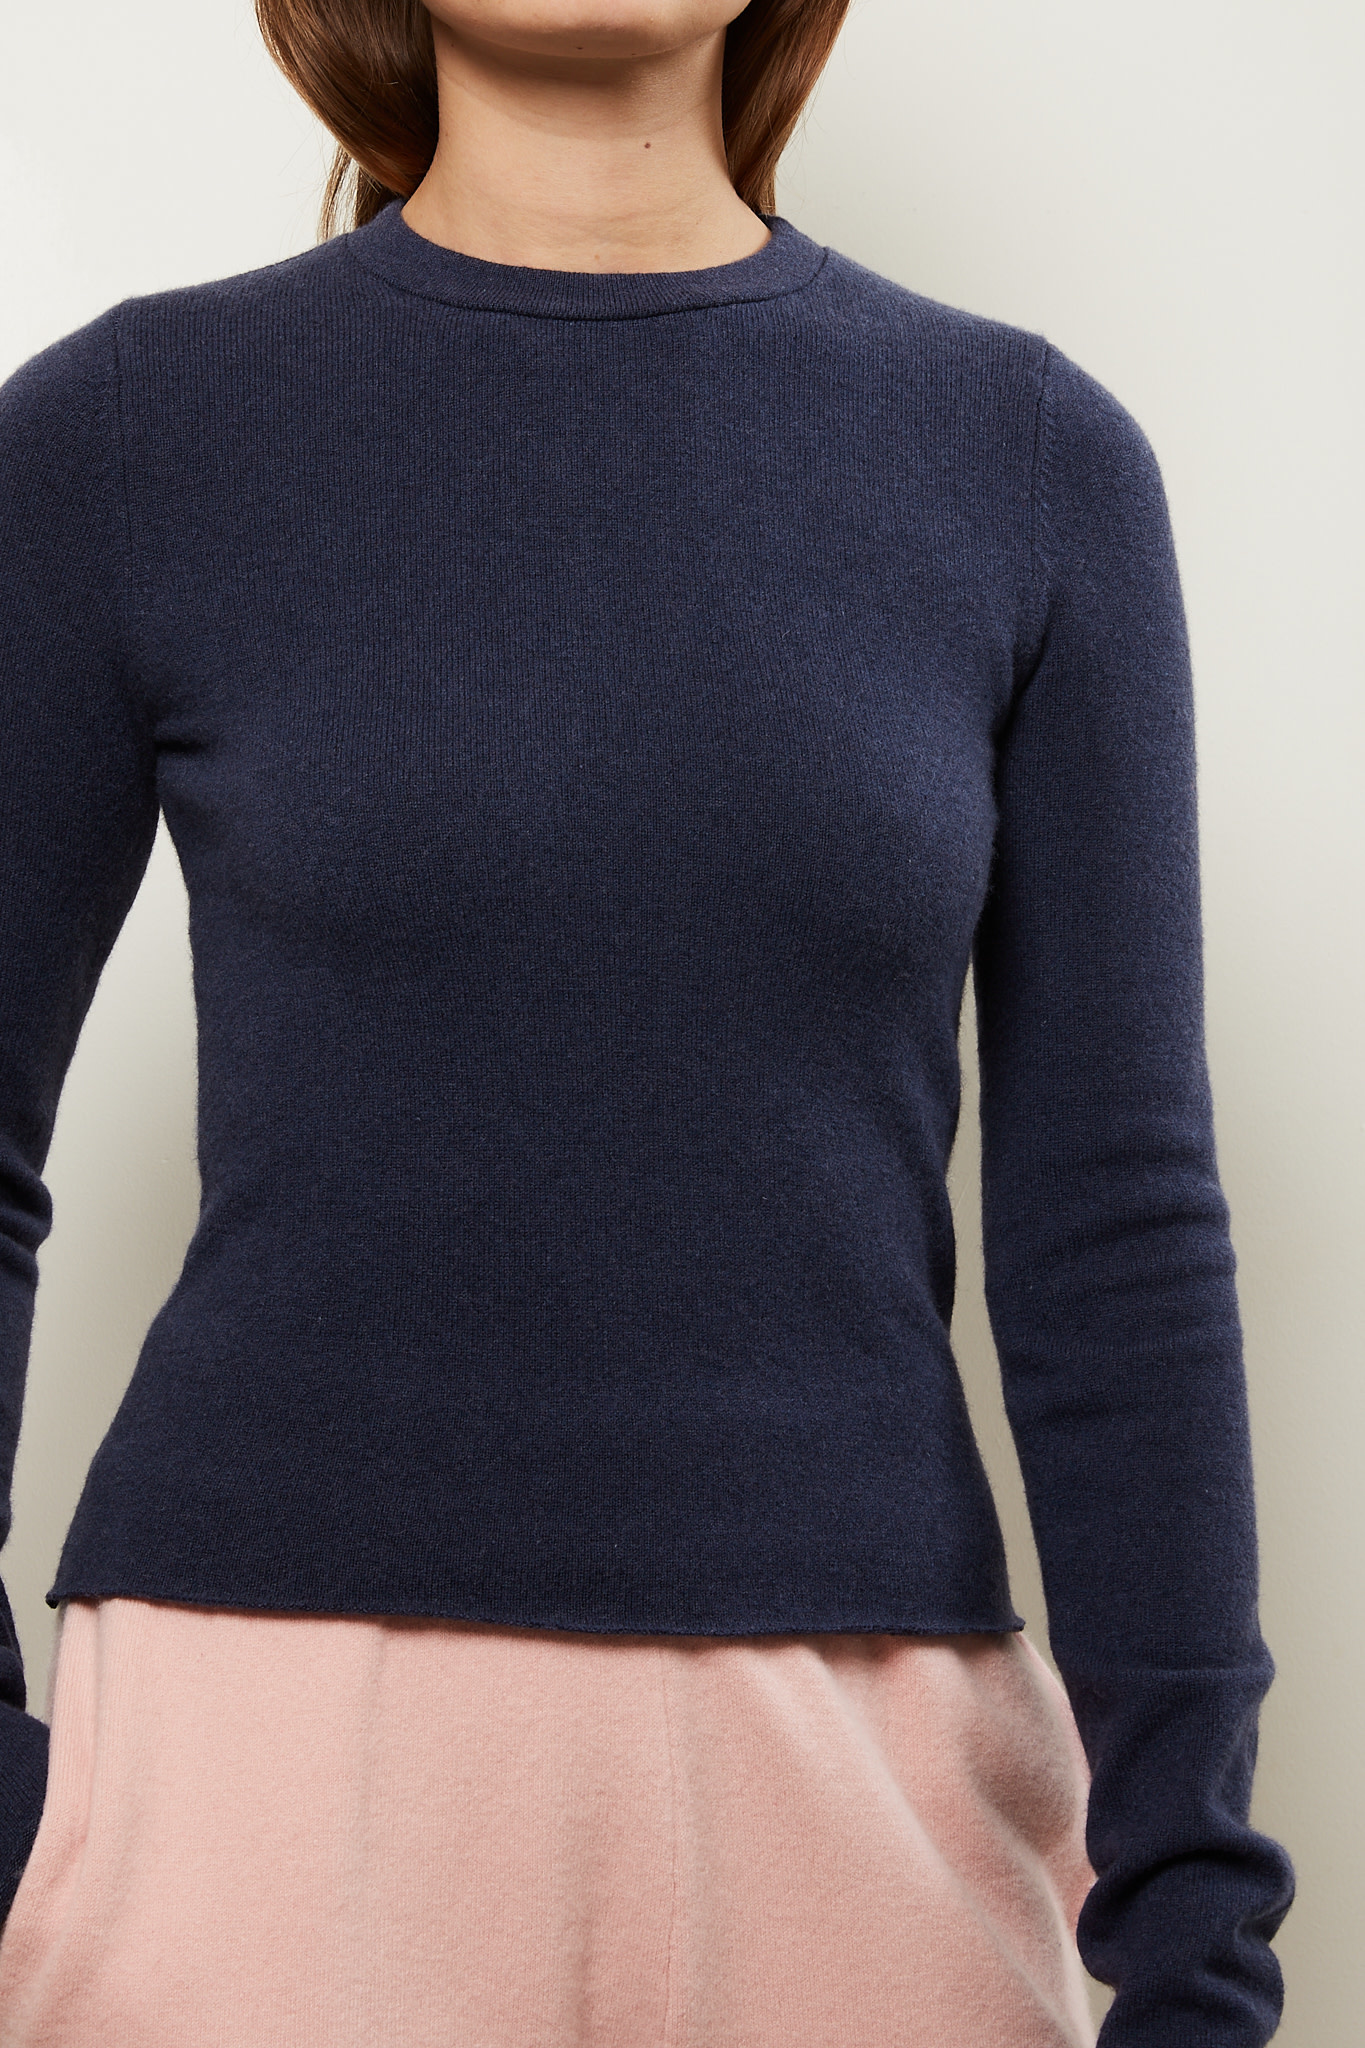 Extreme cashmere - Minus cashmere sweaters